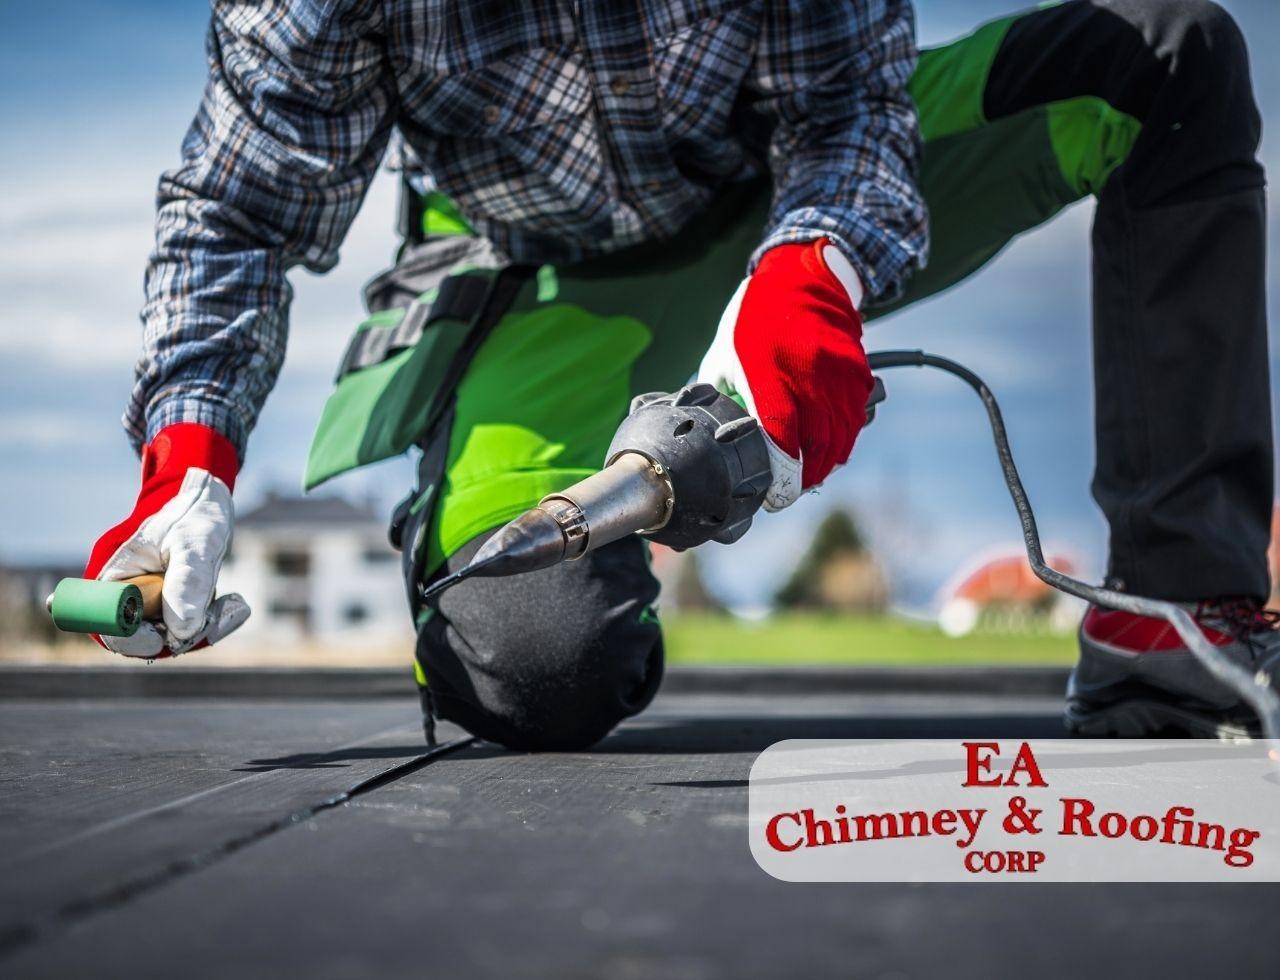 Work with EA Chimney & Roofing, for professional roofing services